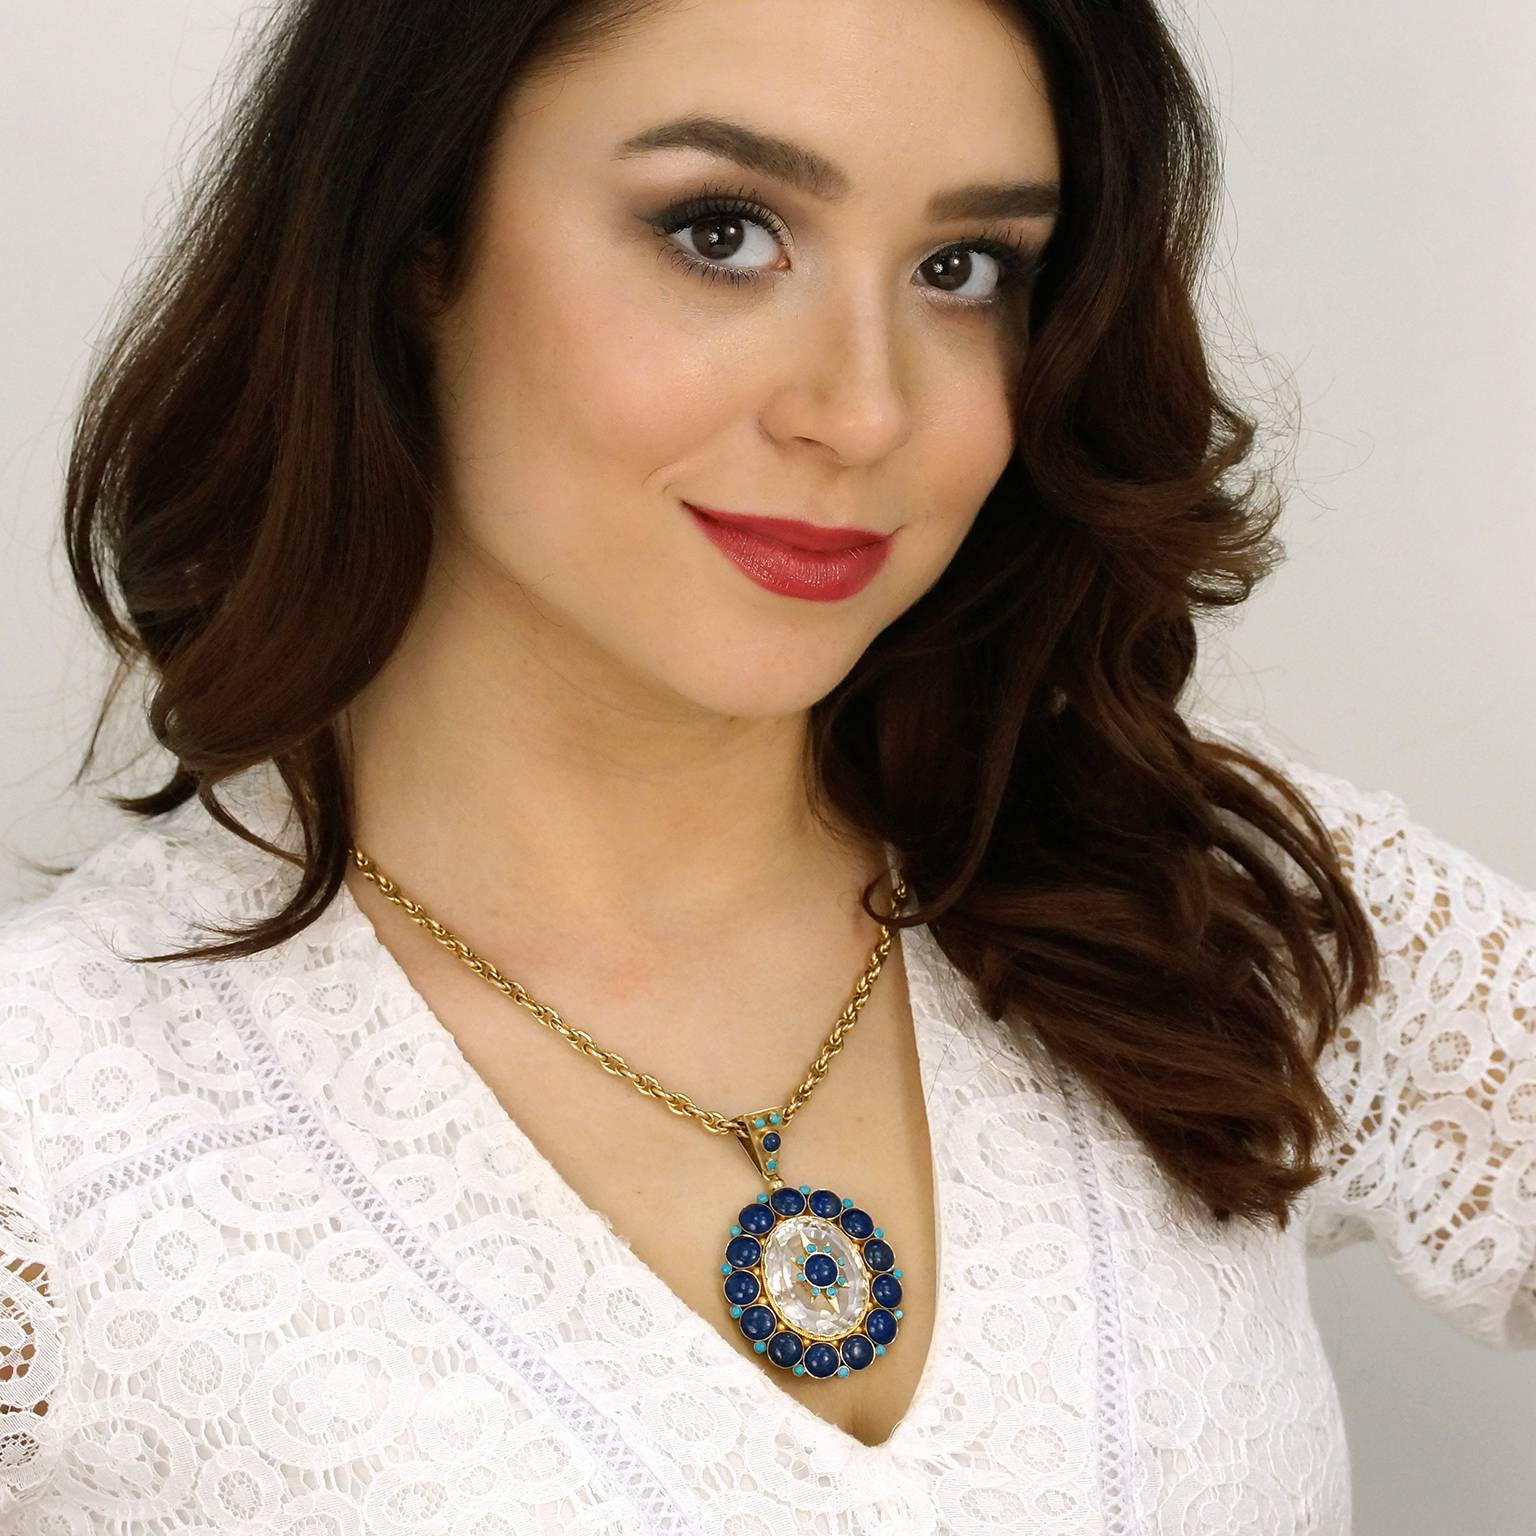 Circa 1890s, 14k. This antique pendant is authentic Bohemian at its vintage, Victorian best. It features a star-festooned rock crystal surrounded by the blue-on-blue of lapis and Persian turquoise. Uniquely set in bloomed yellow gold, its chic look